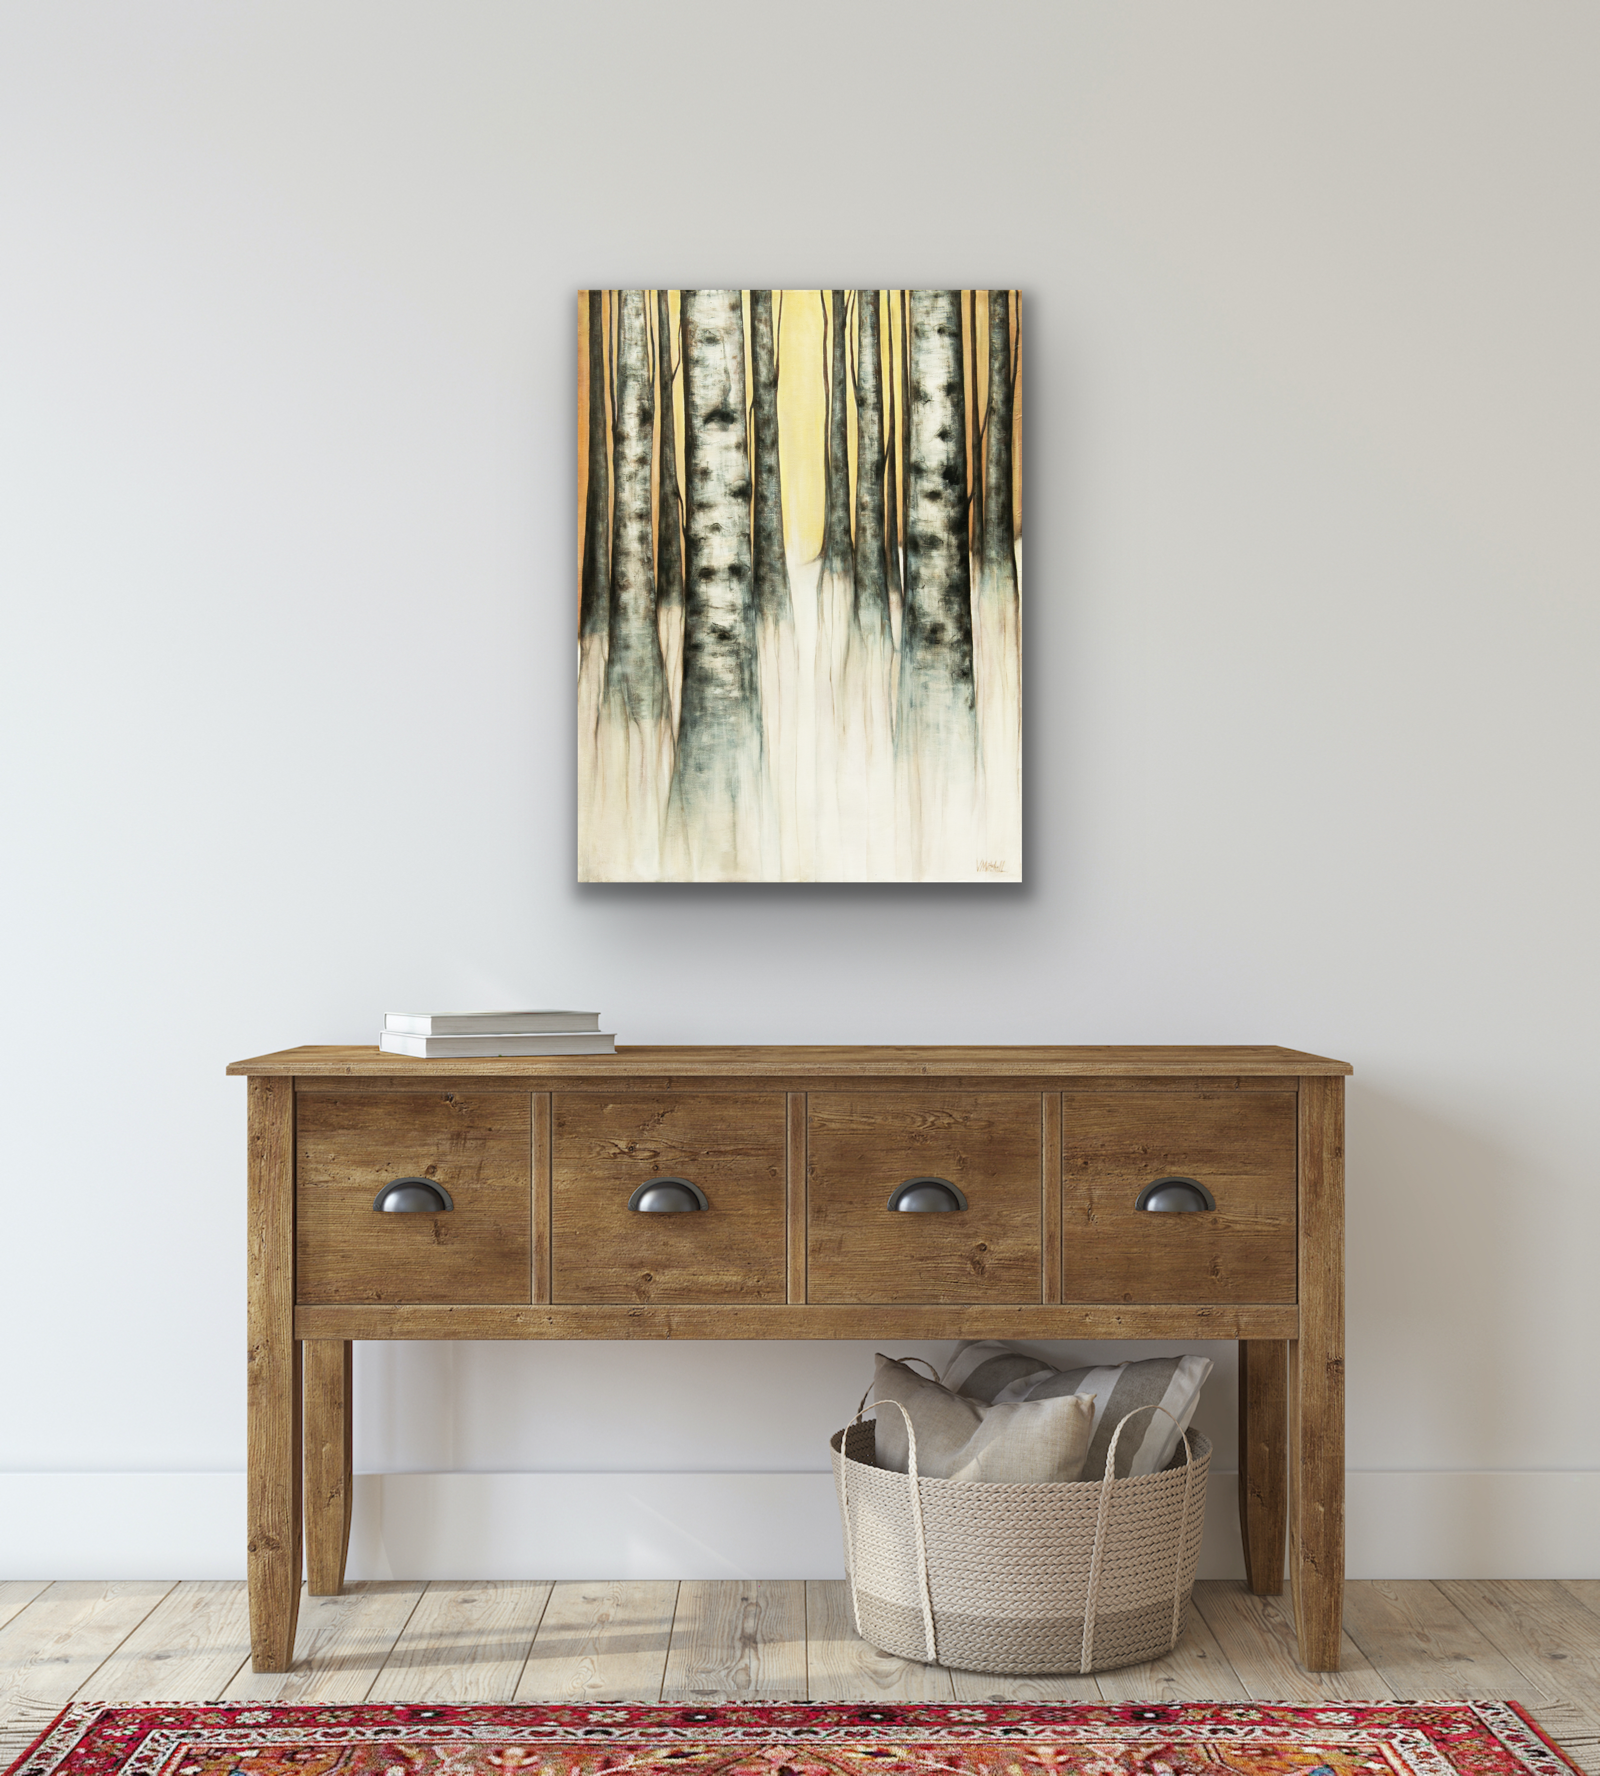 Birch wall art comes in four different sizes to fit your wall perfectly.